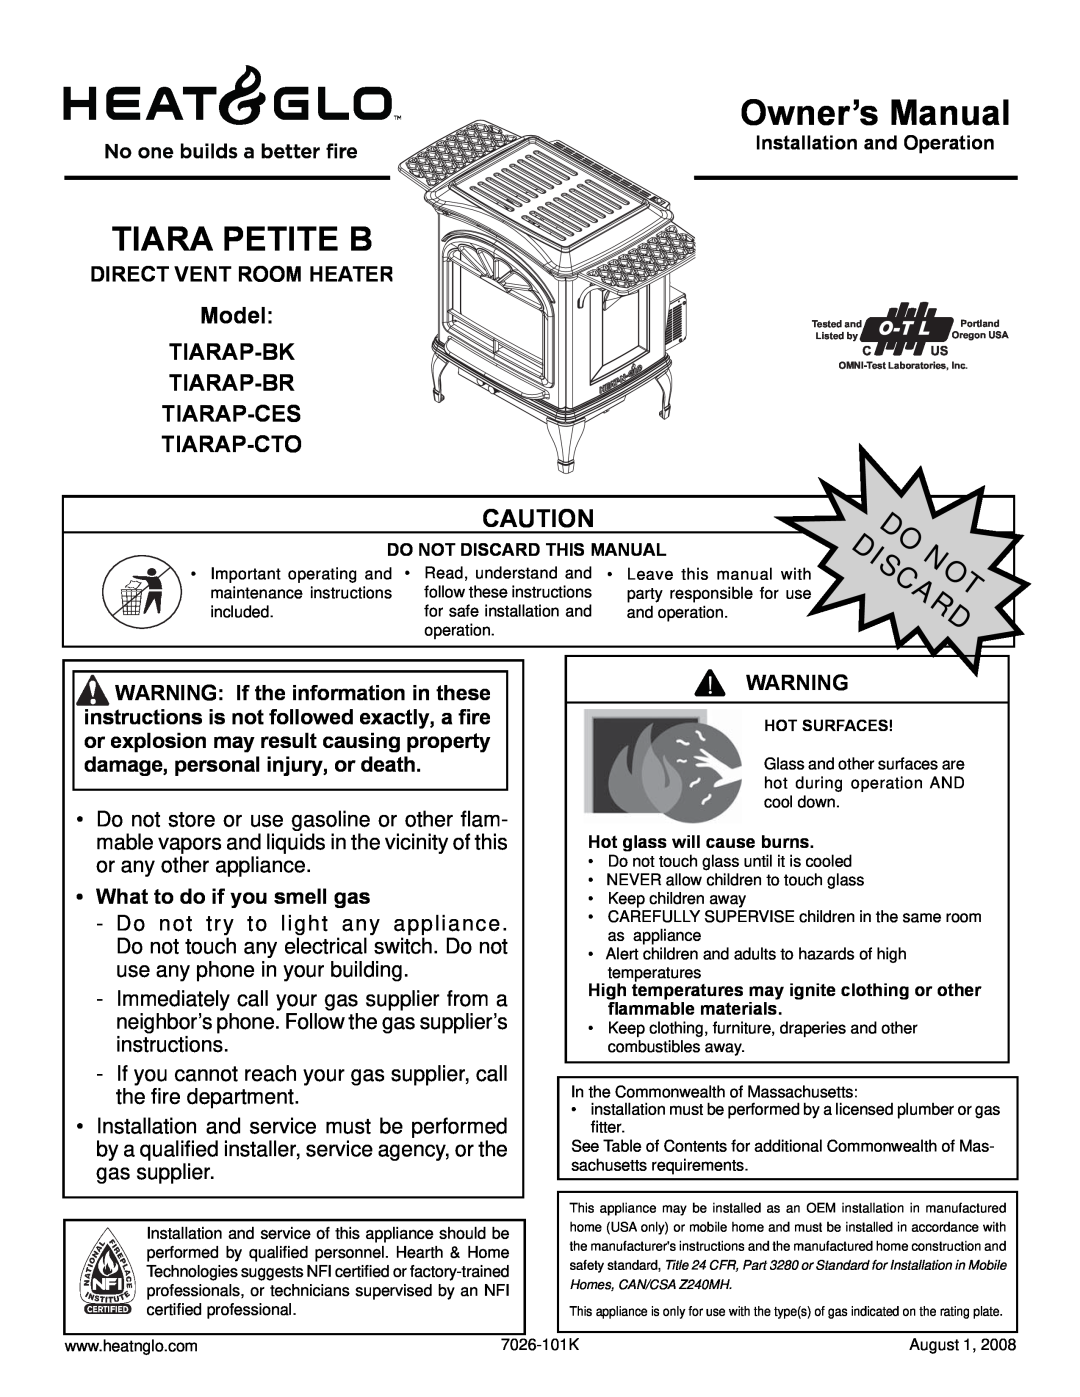 Heat & Glo LifeStyle TIARAP-CTO owner manual Owner’s Manual, Direct Vent Room Heater, What to do if you smell gas 